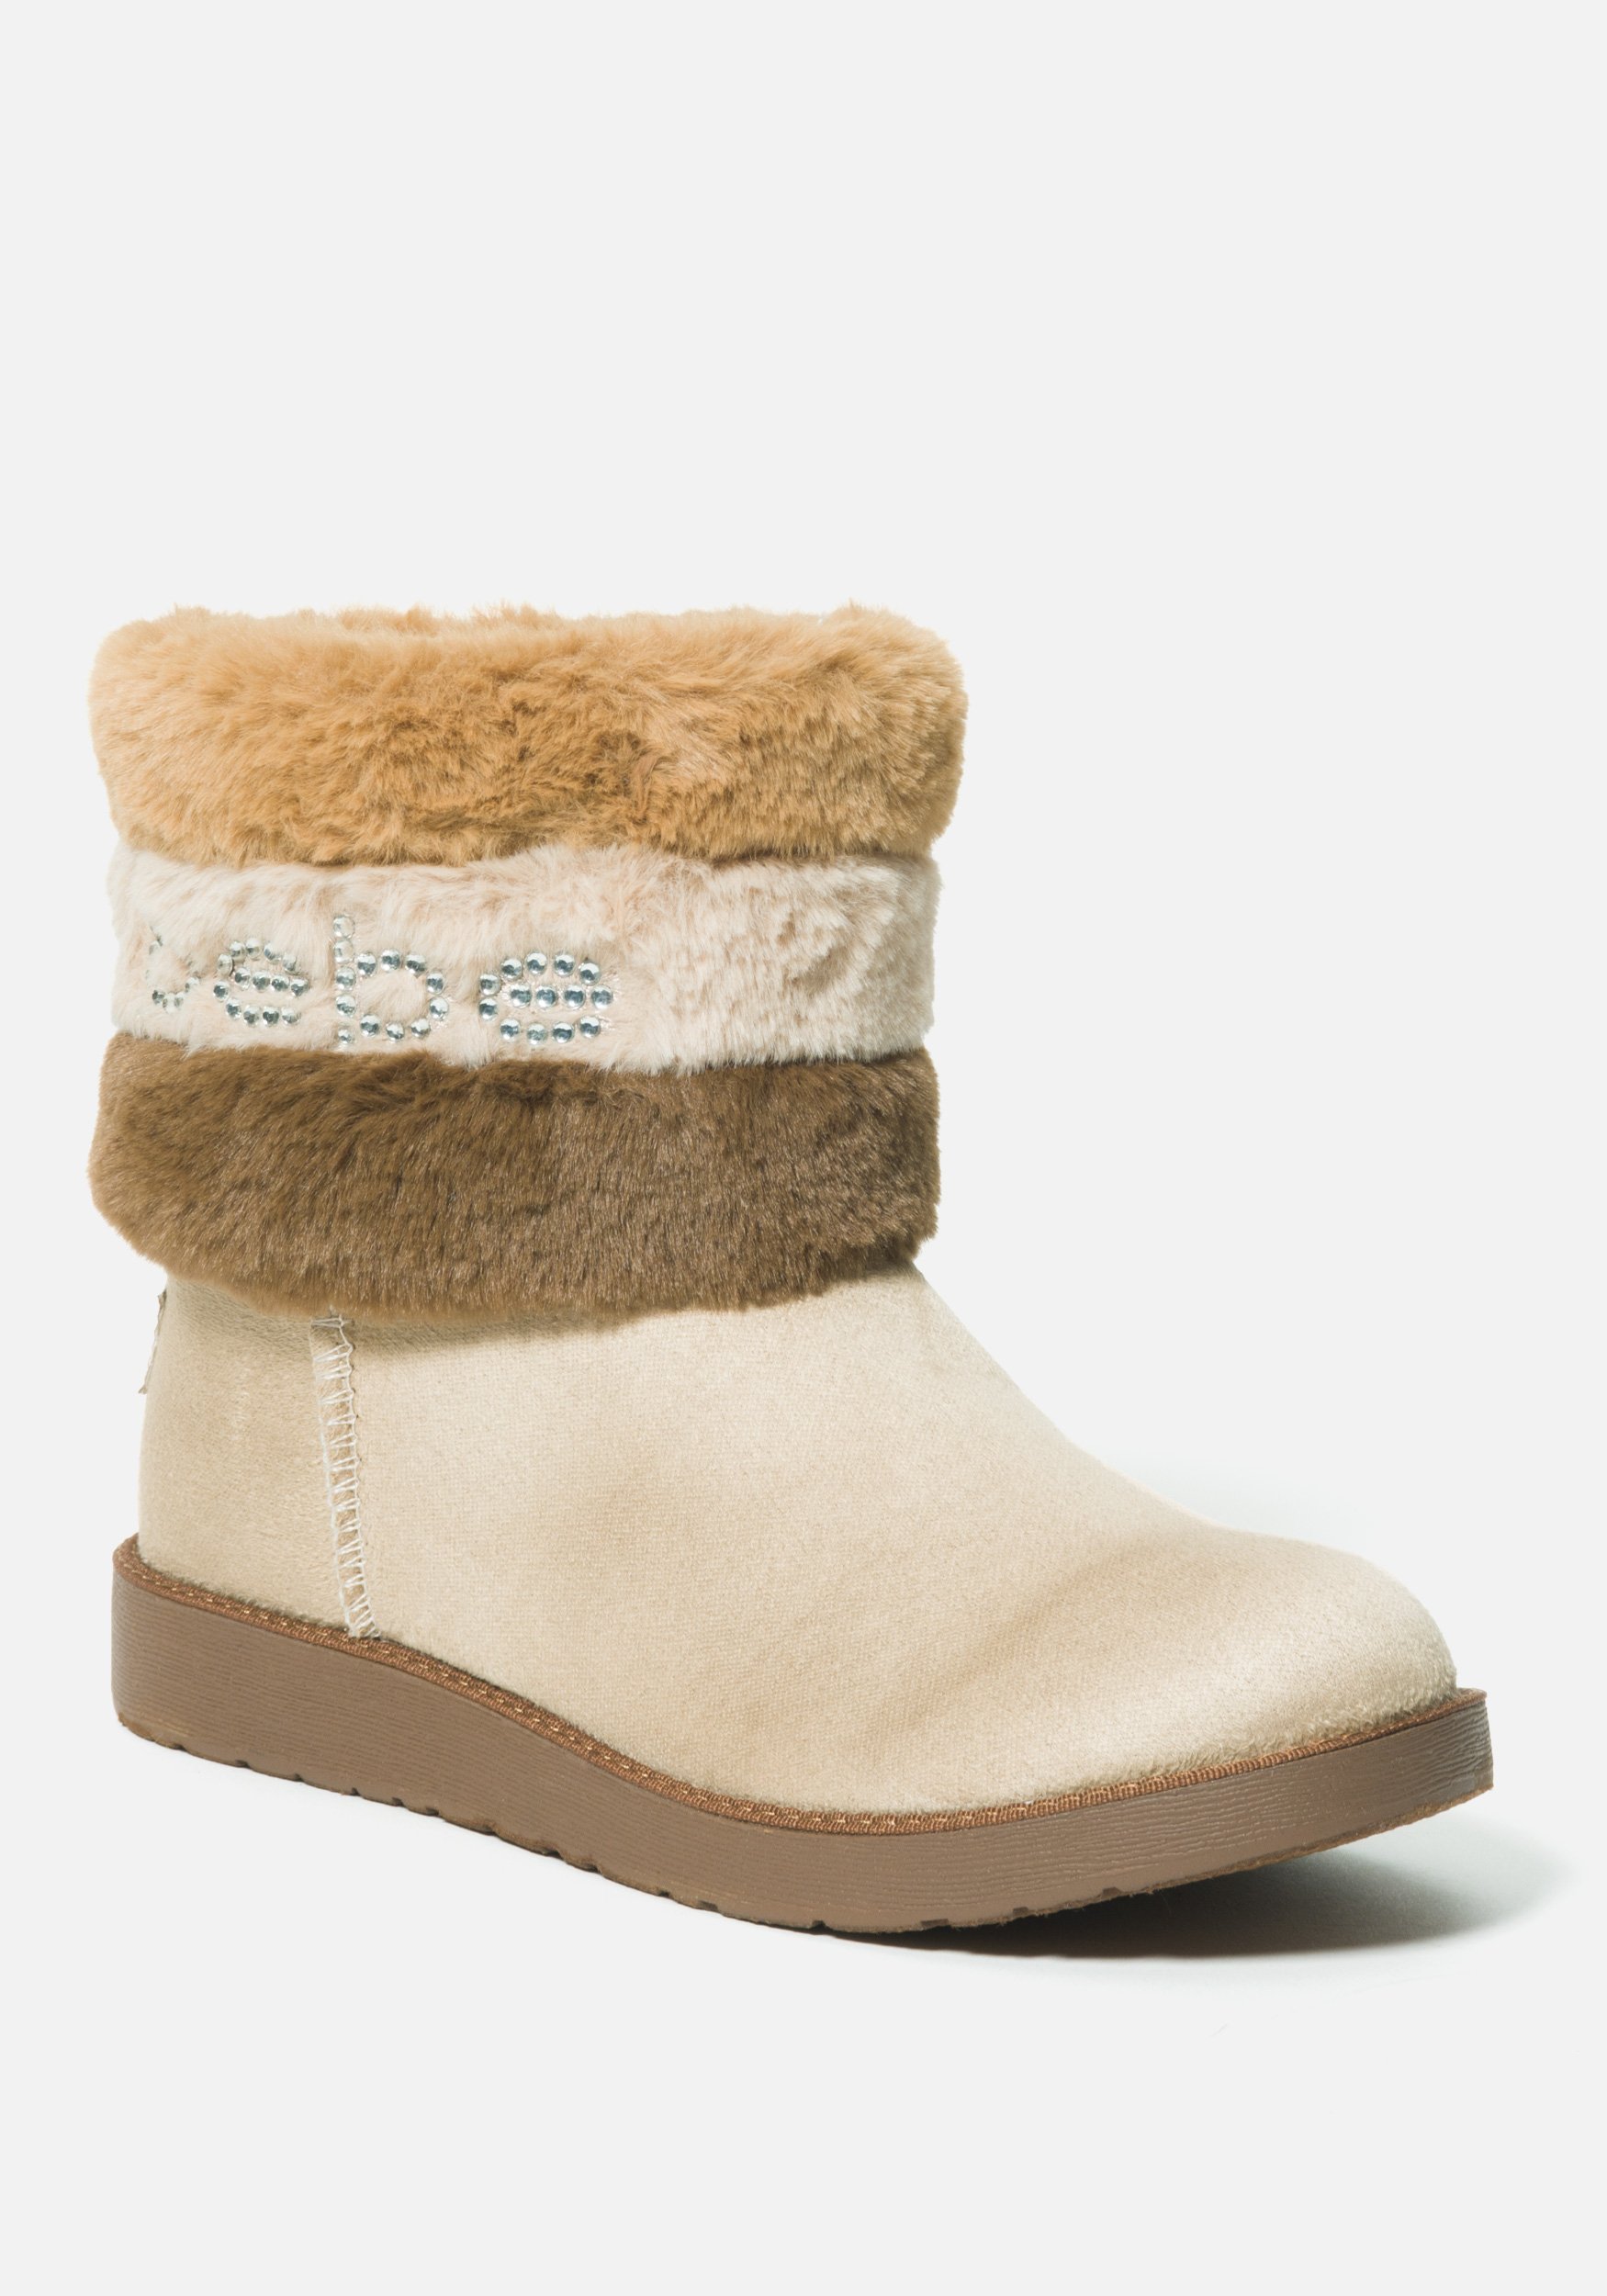 Bebe Women's Laverne Faux Suede Winter Boot, Size 7.5 in SAND